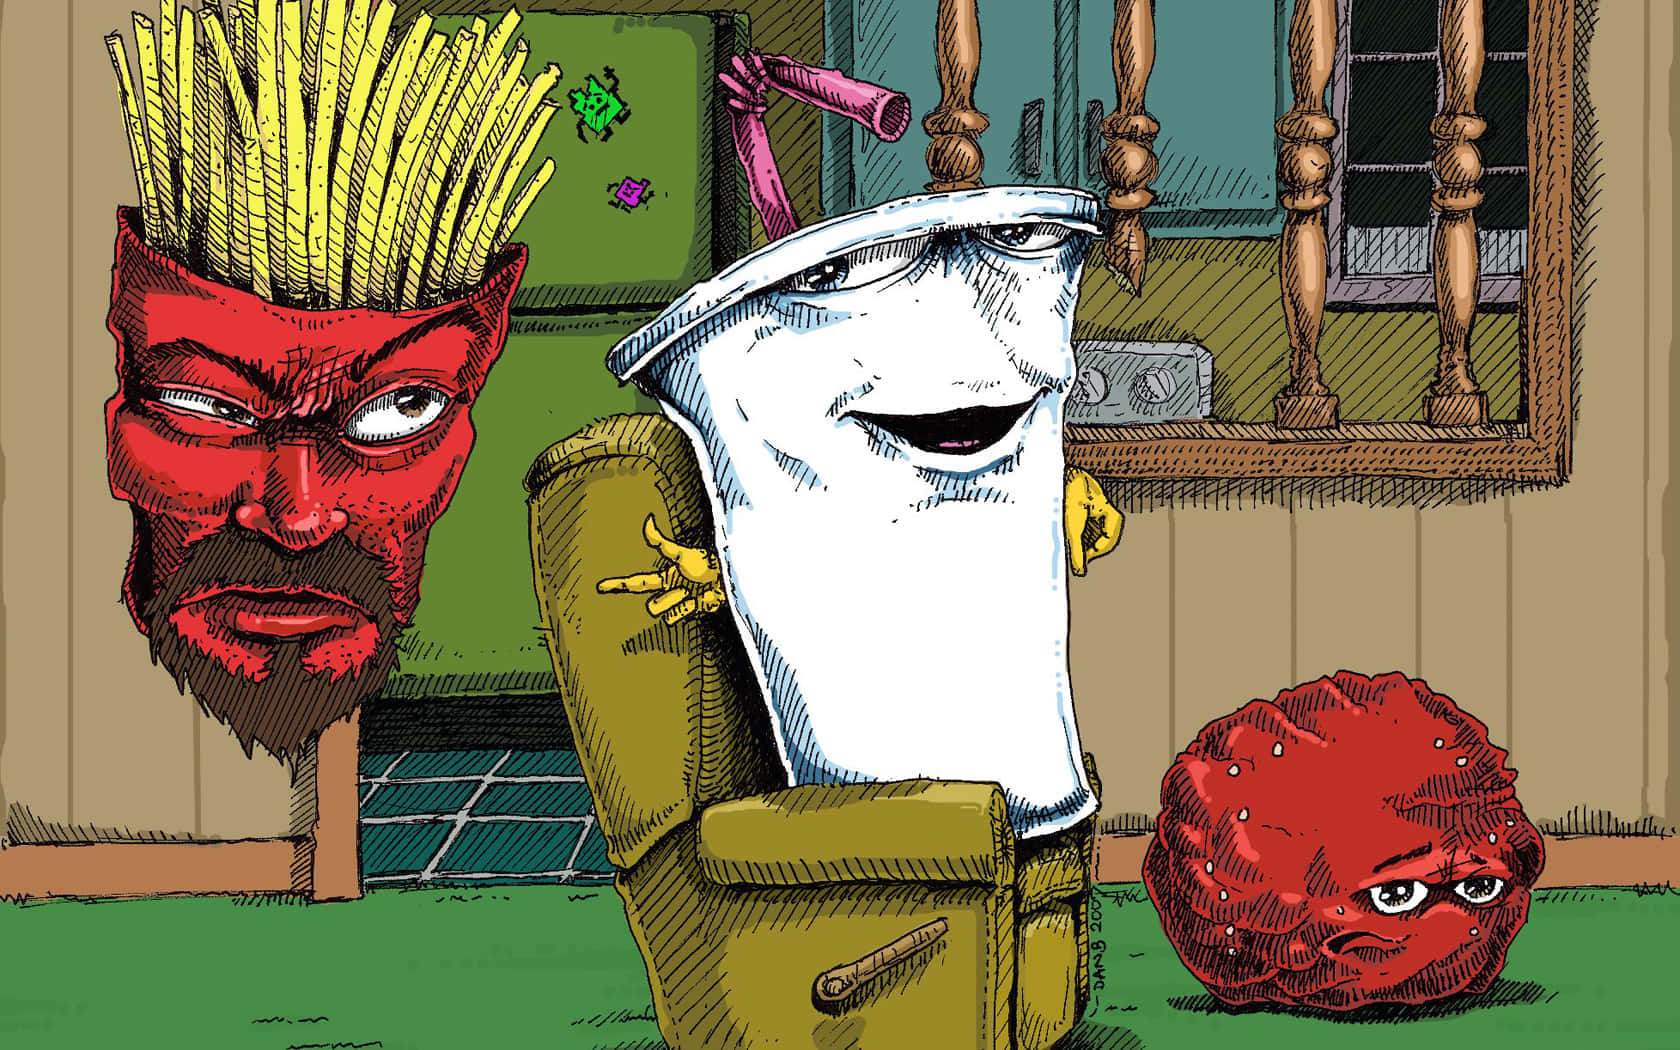 A Hilarious Moment with Aqua Teen Hunger Force